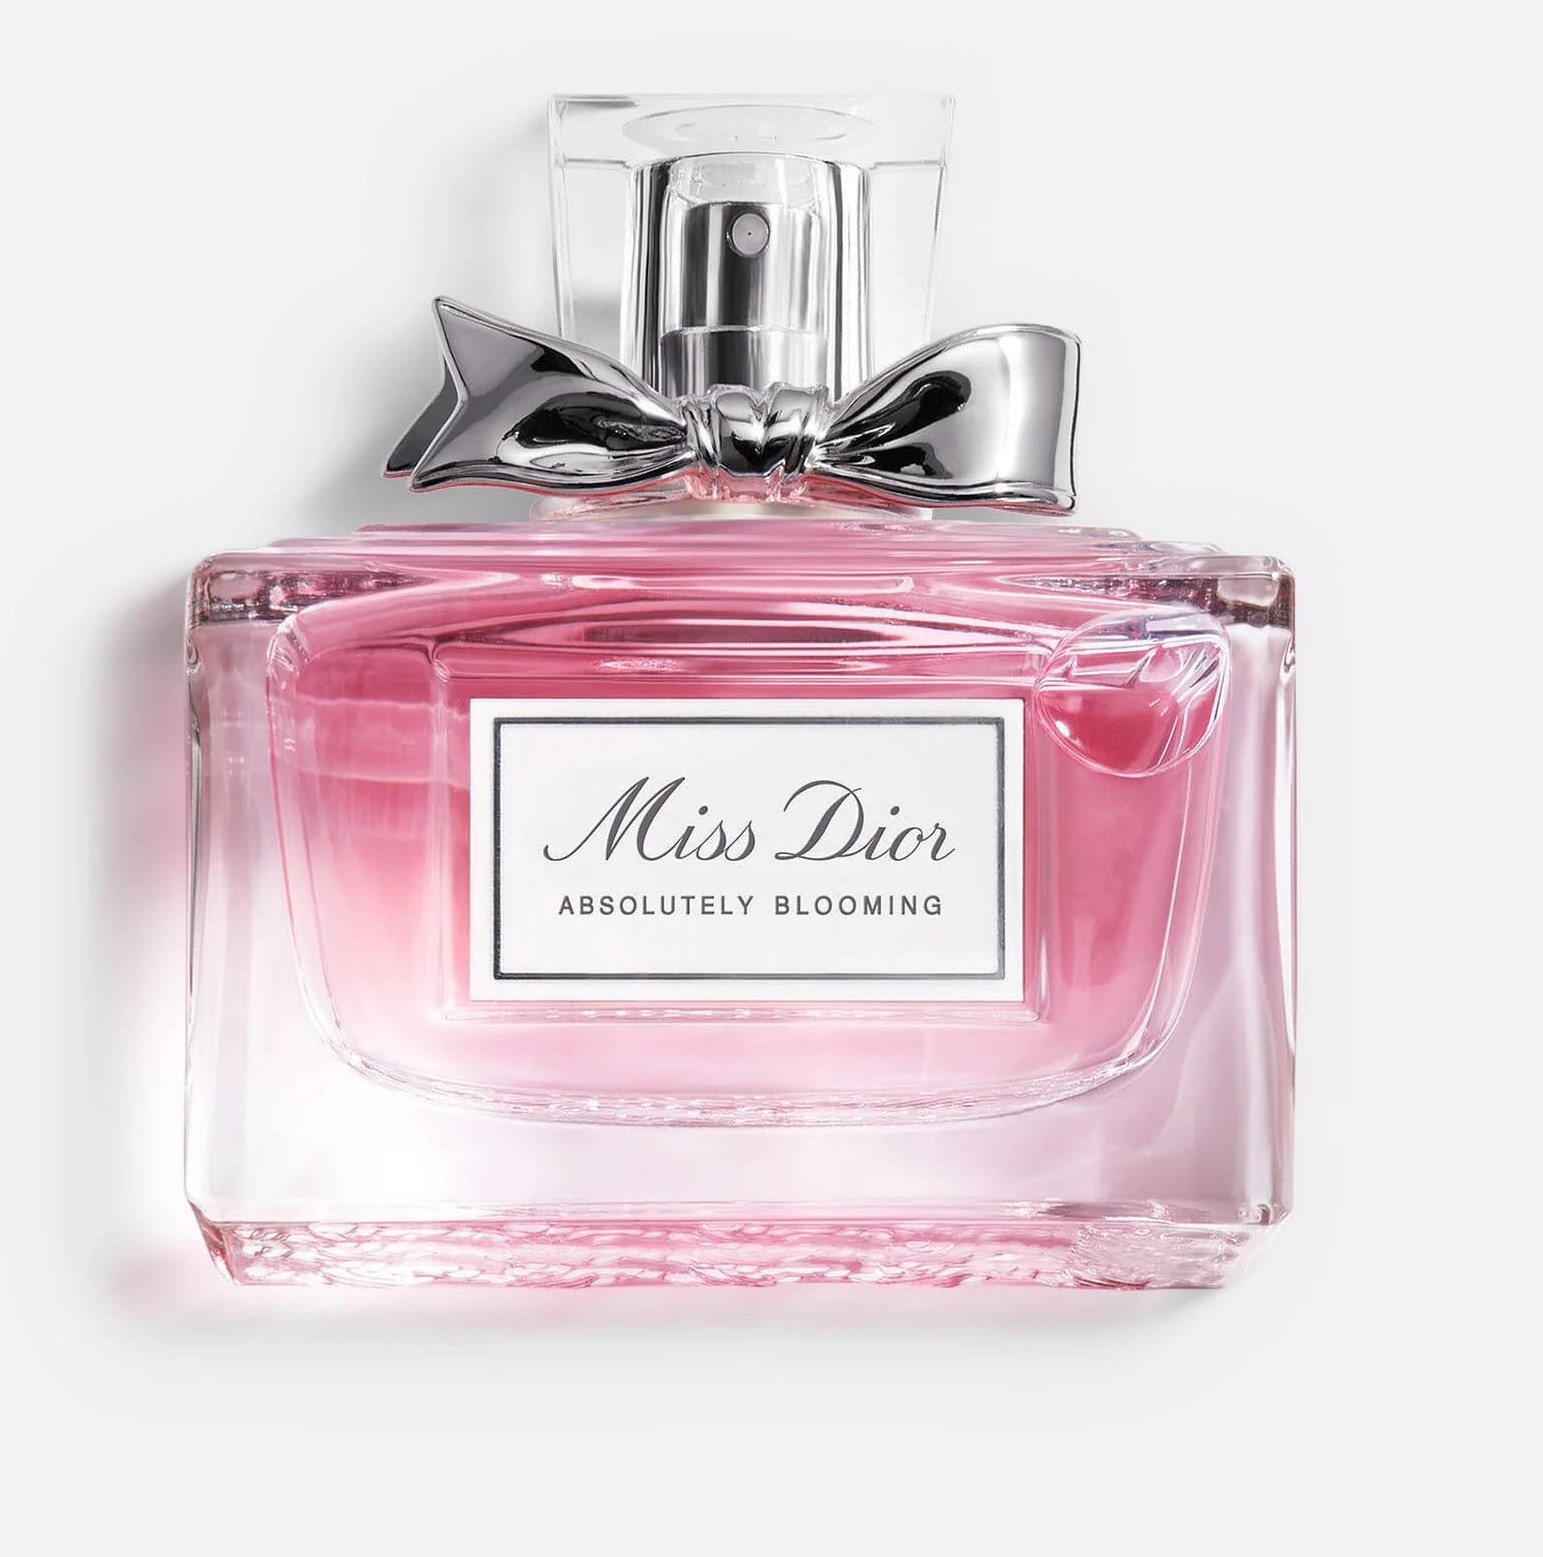 Miss Dior Absolutely Blooming EDP Perfume for Women by Dior